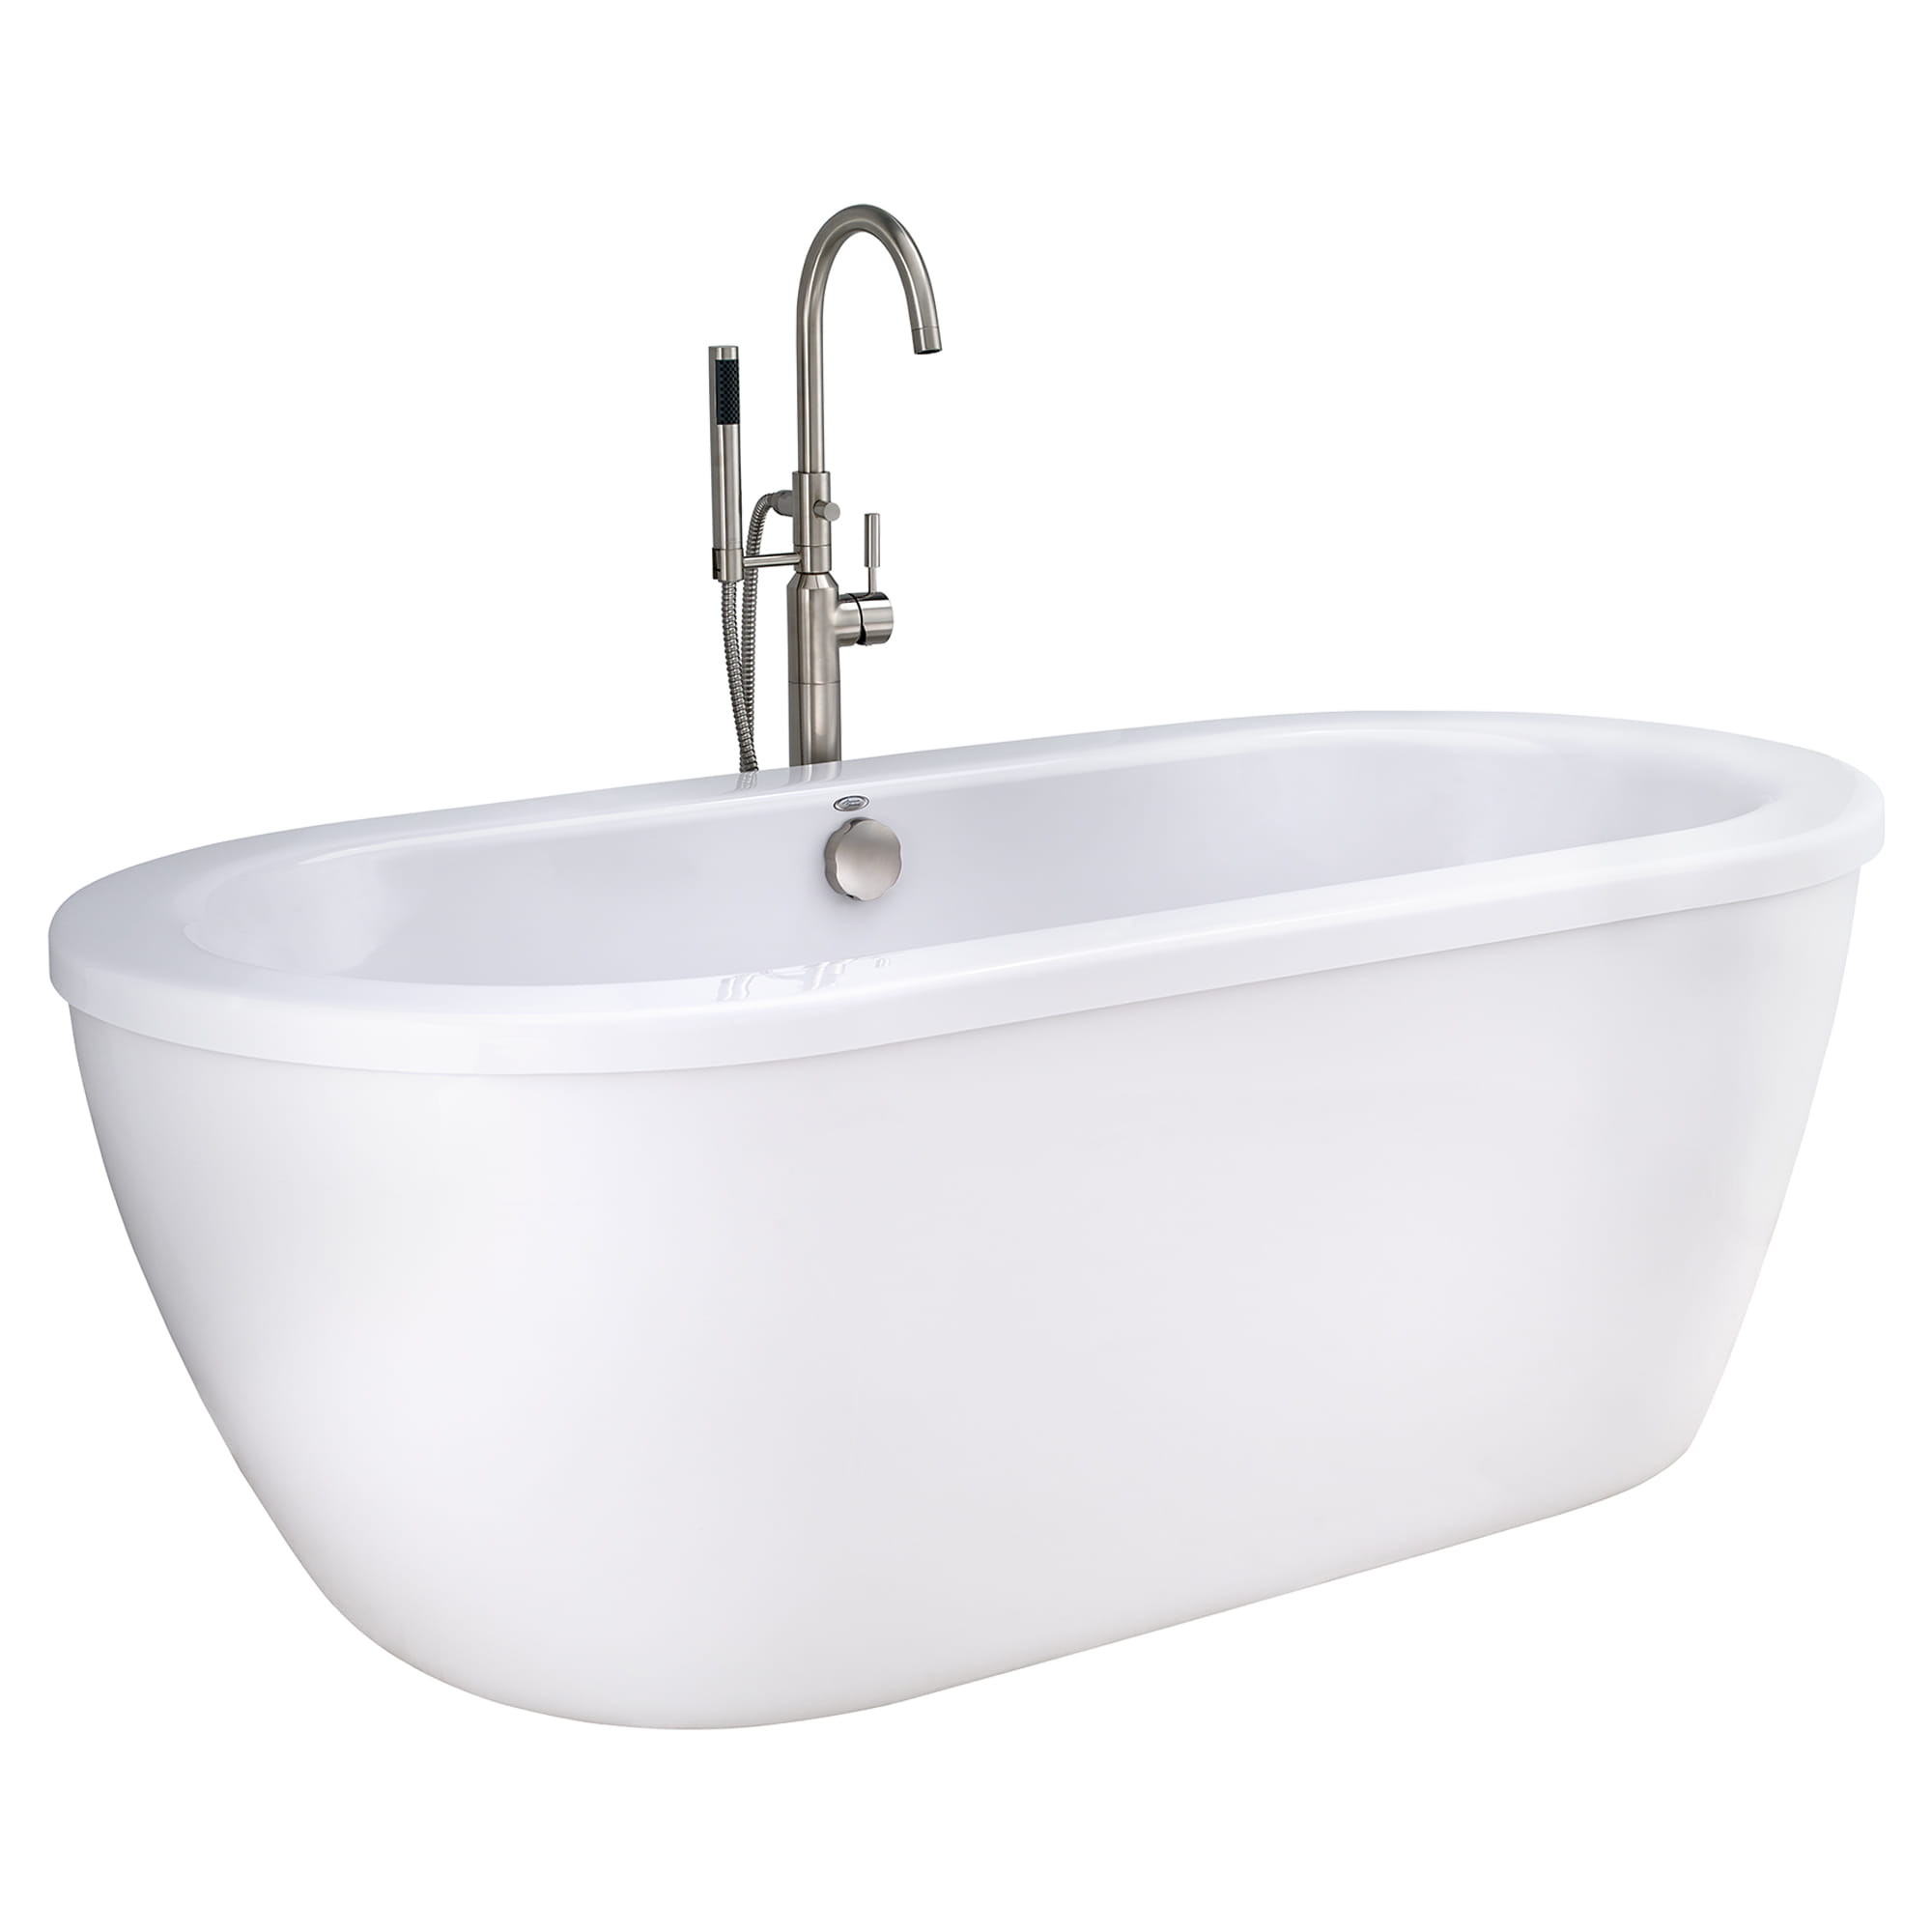 Cadet 66 x 32 Inch Freestanding Bathtub With Brushed Nickel Finish Filler and Drain Kit ARCTIC